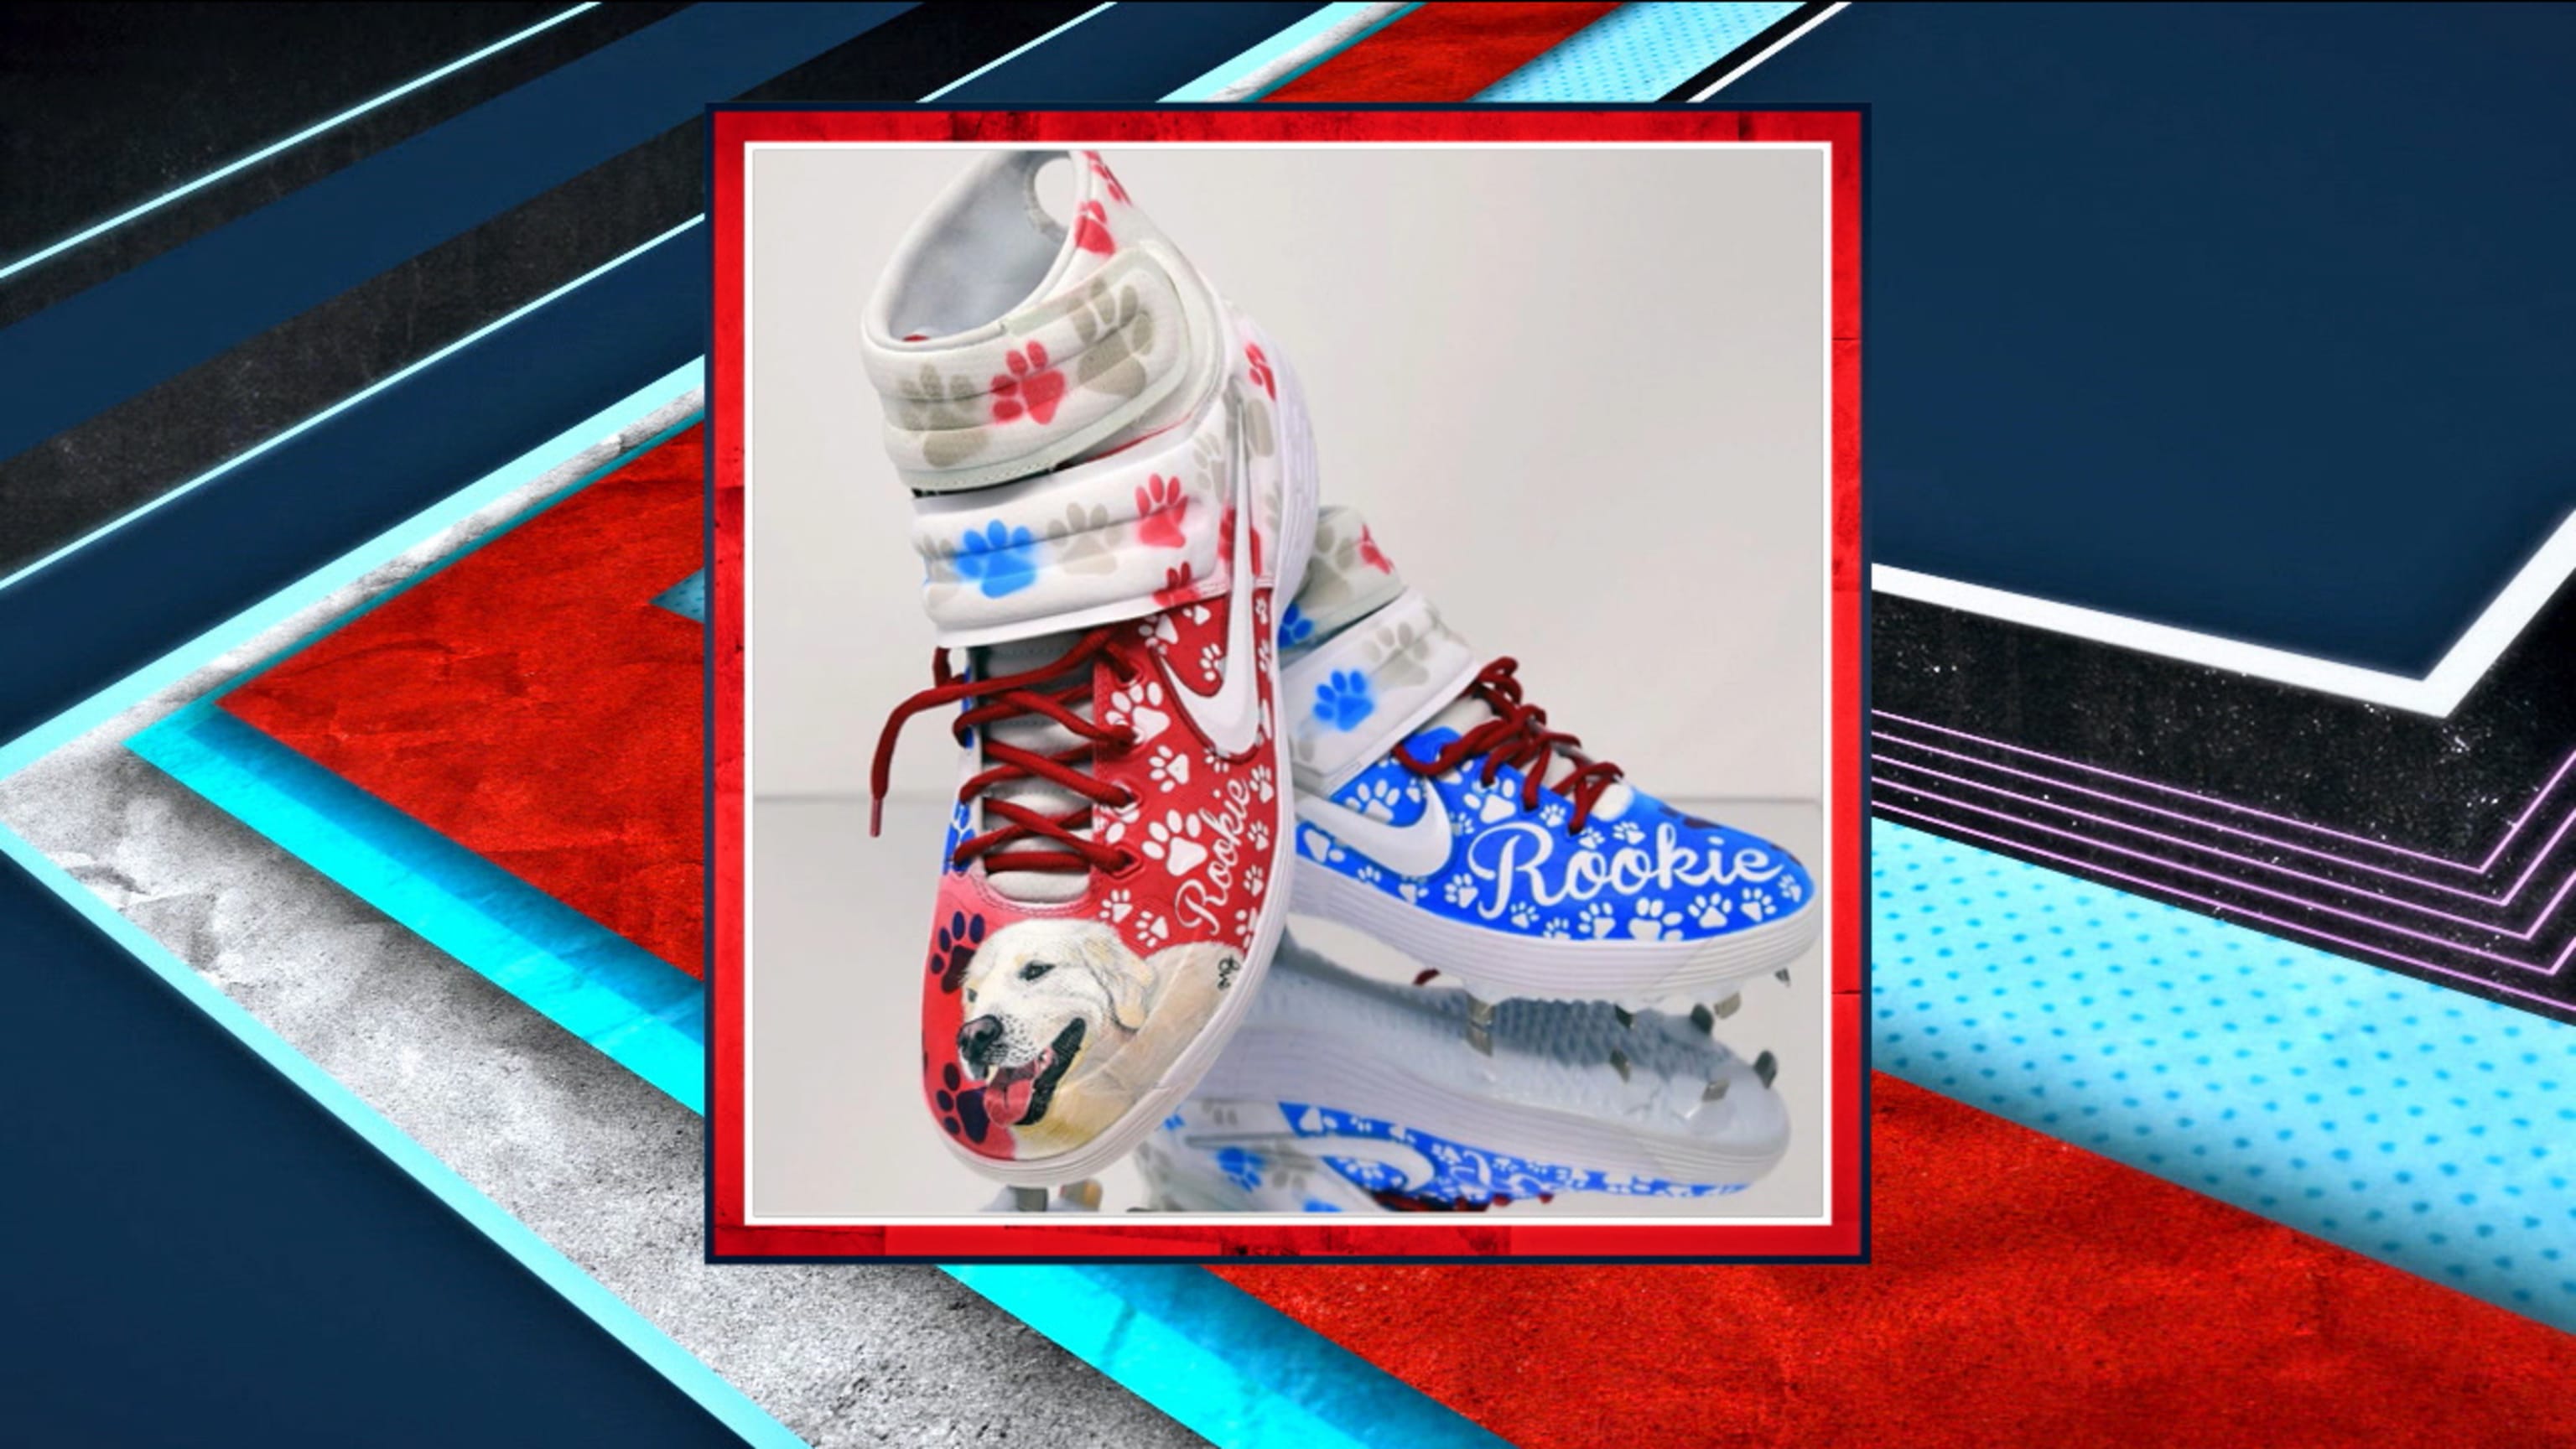 Dodgers' Tony Gonsolin designs cleats to help minor leaguers - Los